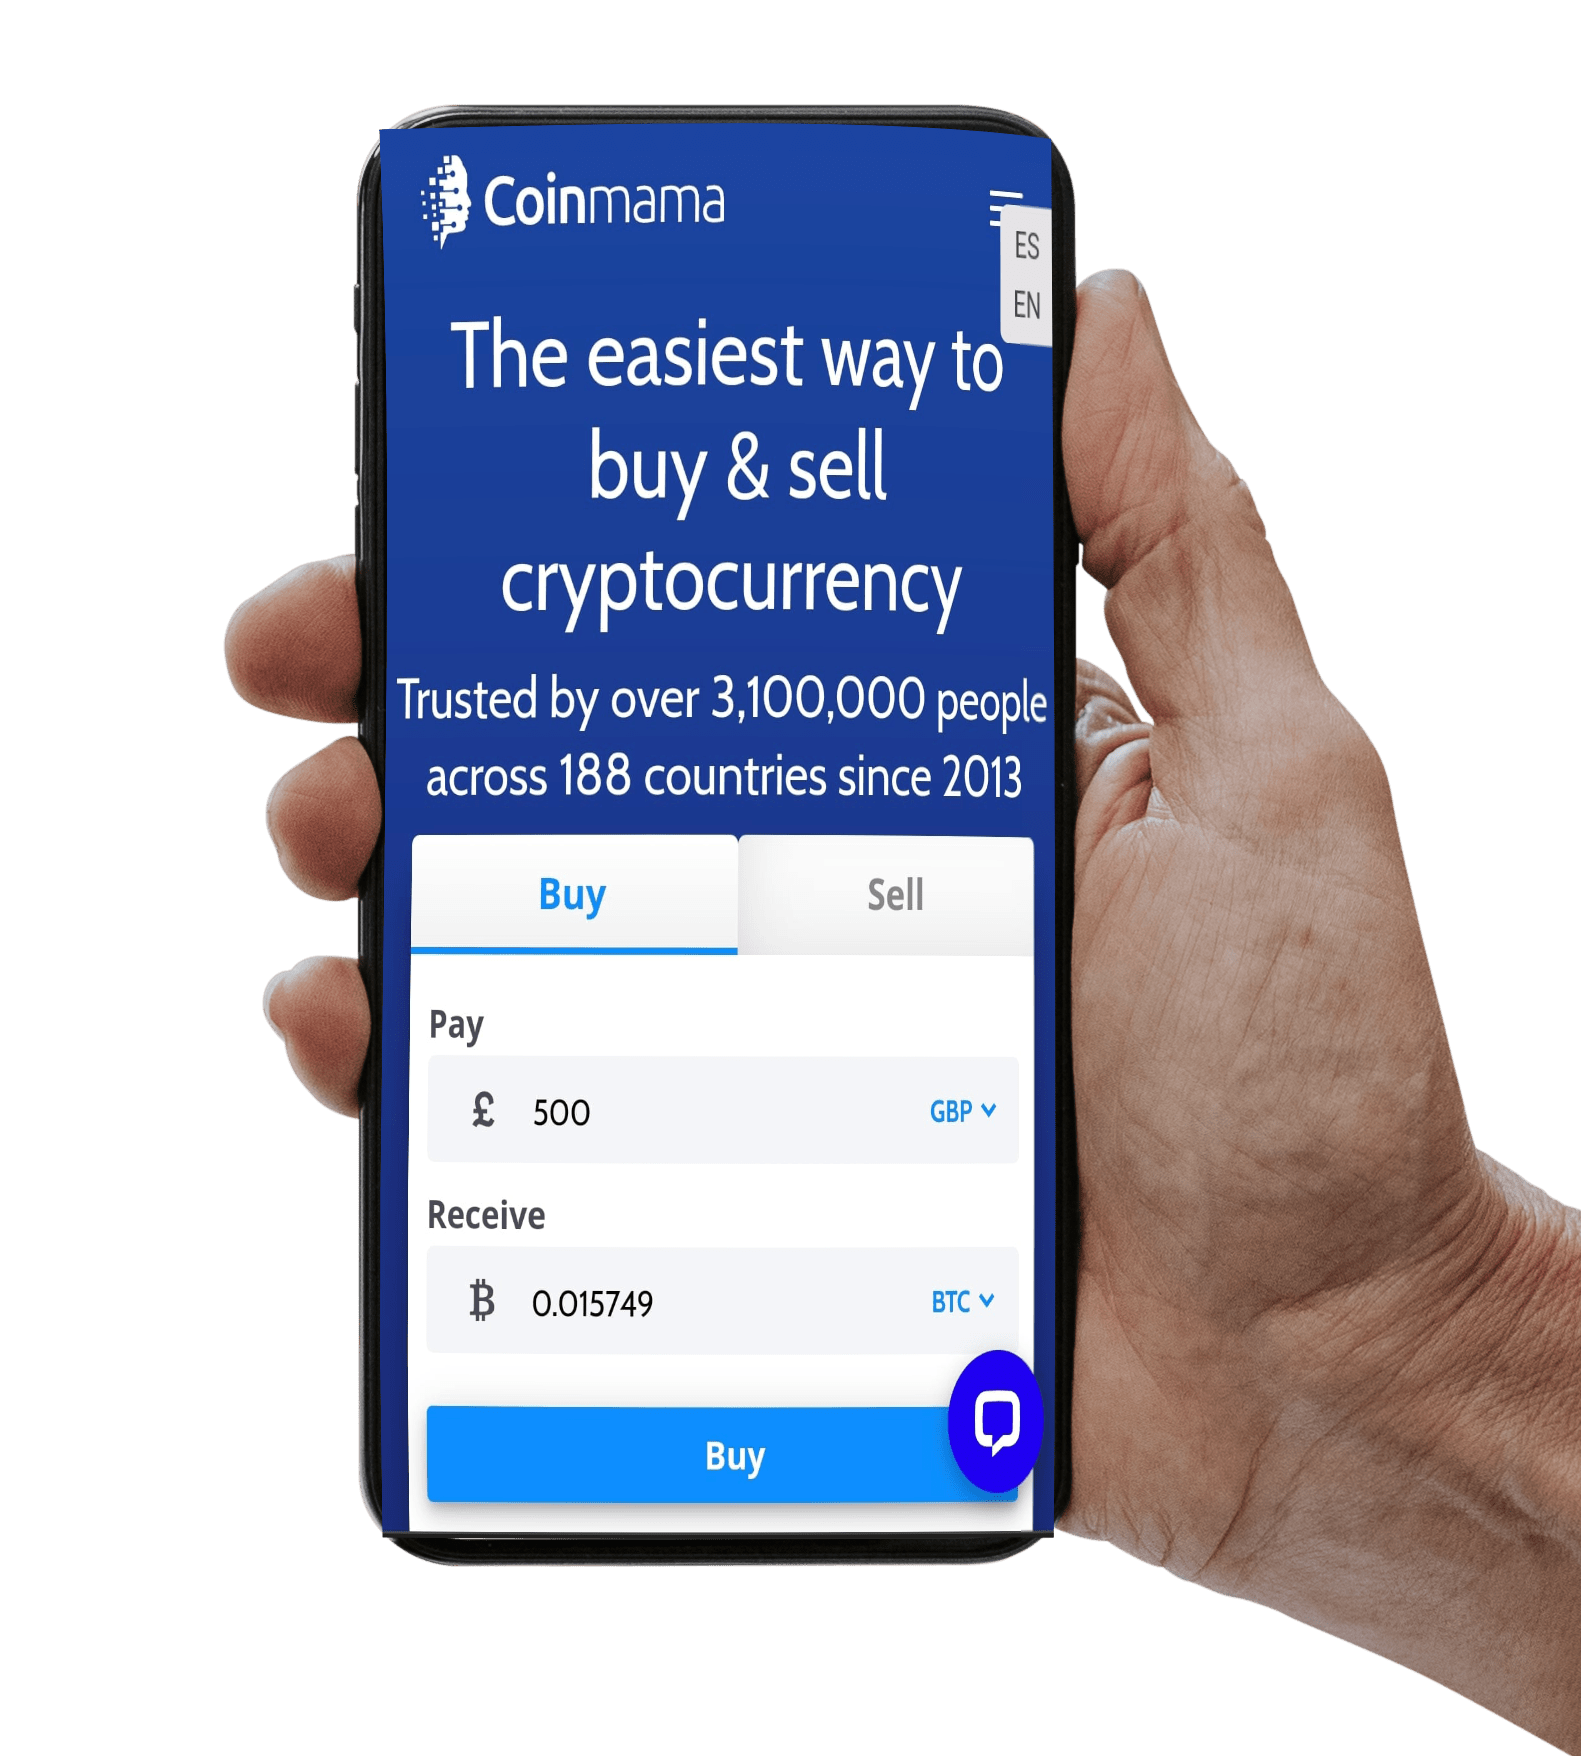 Iphone Image of Coinmama